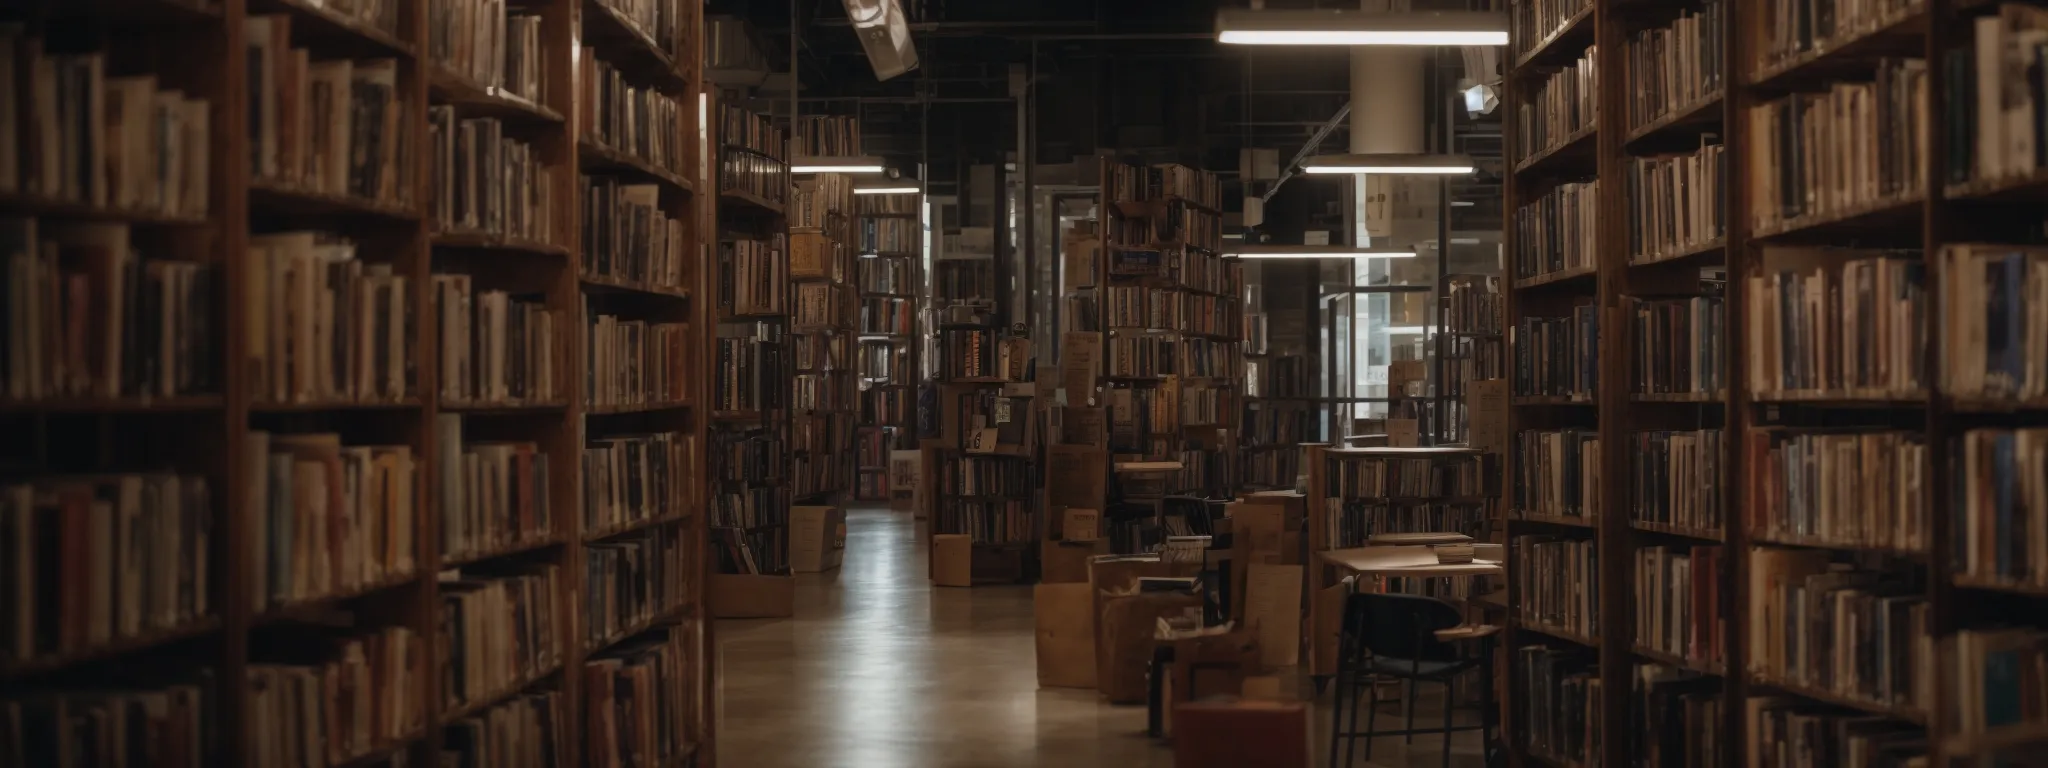 a library with rows of diverse books representing a wealth of information and the concept of sorting through content for relevance and meaning.